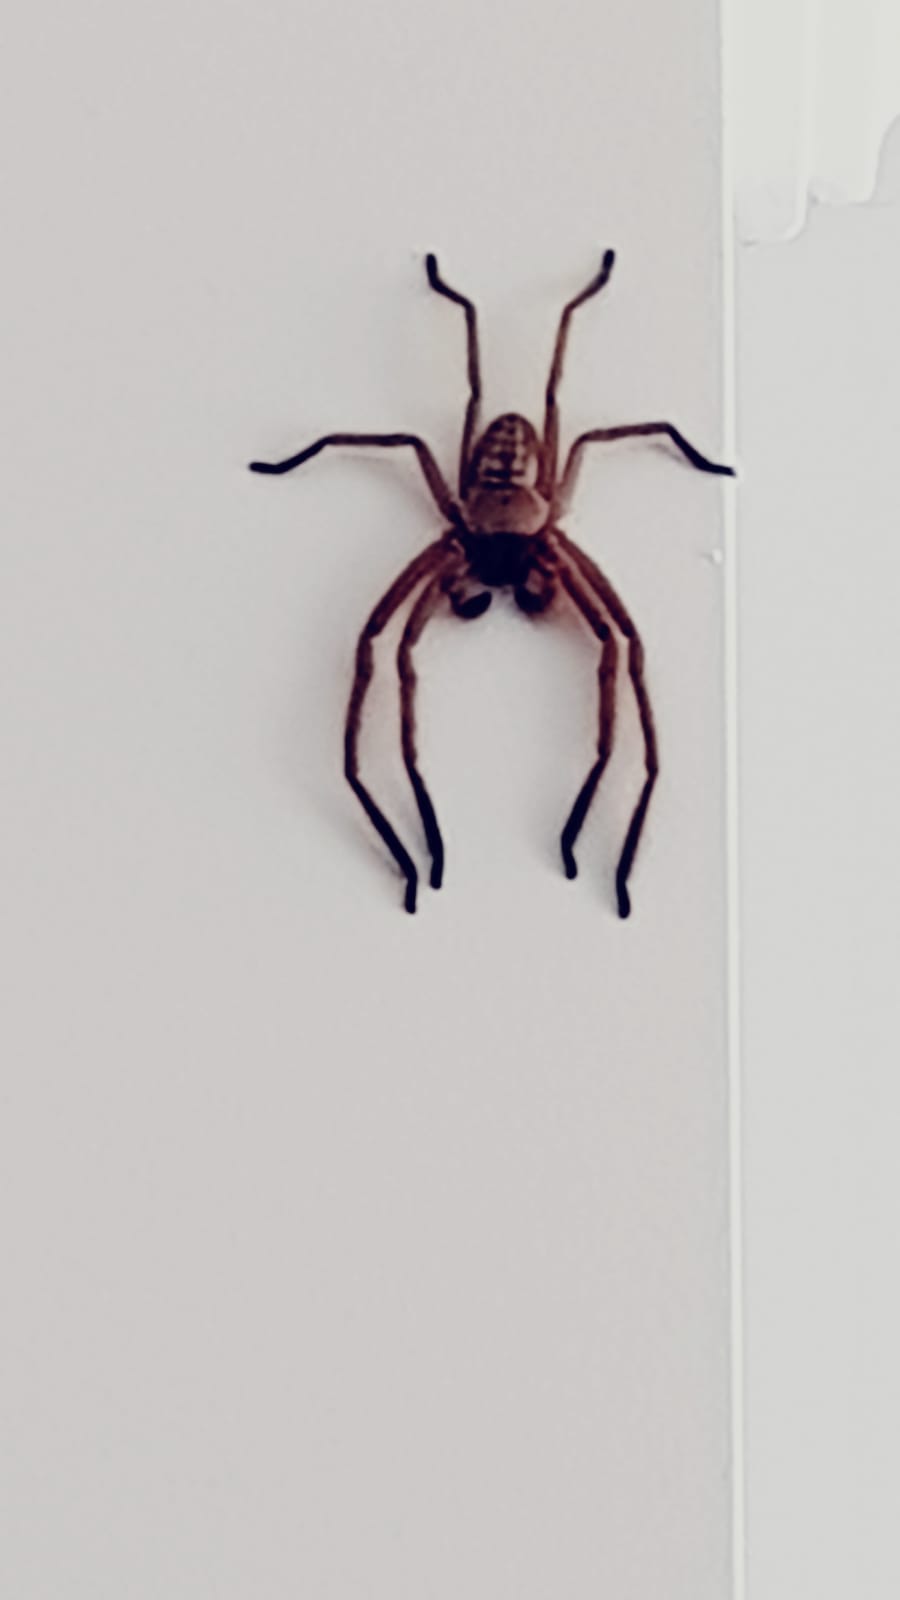 Picture of Sparassidae (Giant Crab Spiders) - Male - Dorsal